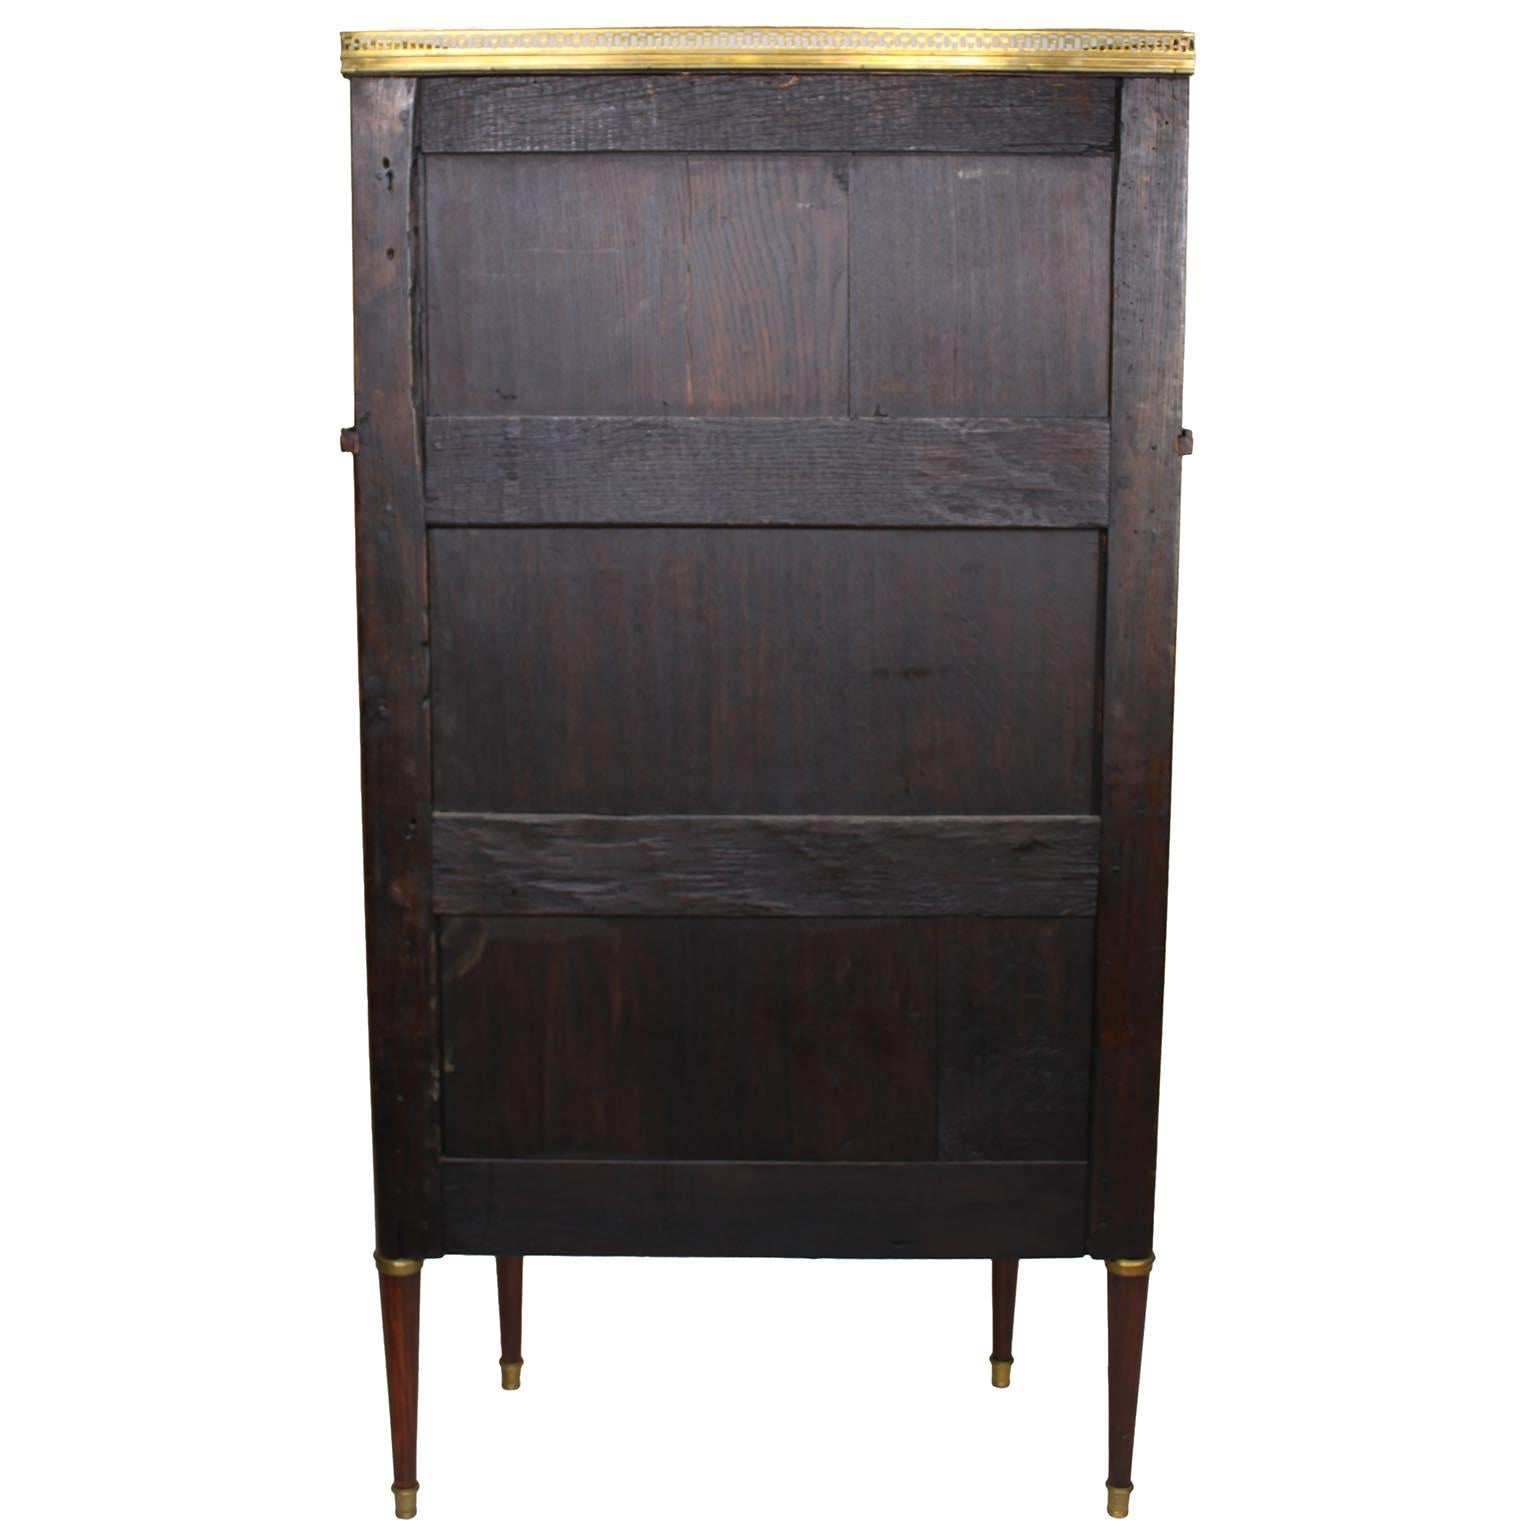 A French 19th Century Louis XVI Style Gilt-Bronze Mounted Meuble d'Appui Cabinet For Sale 8